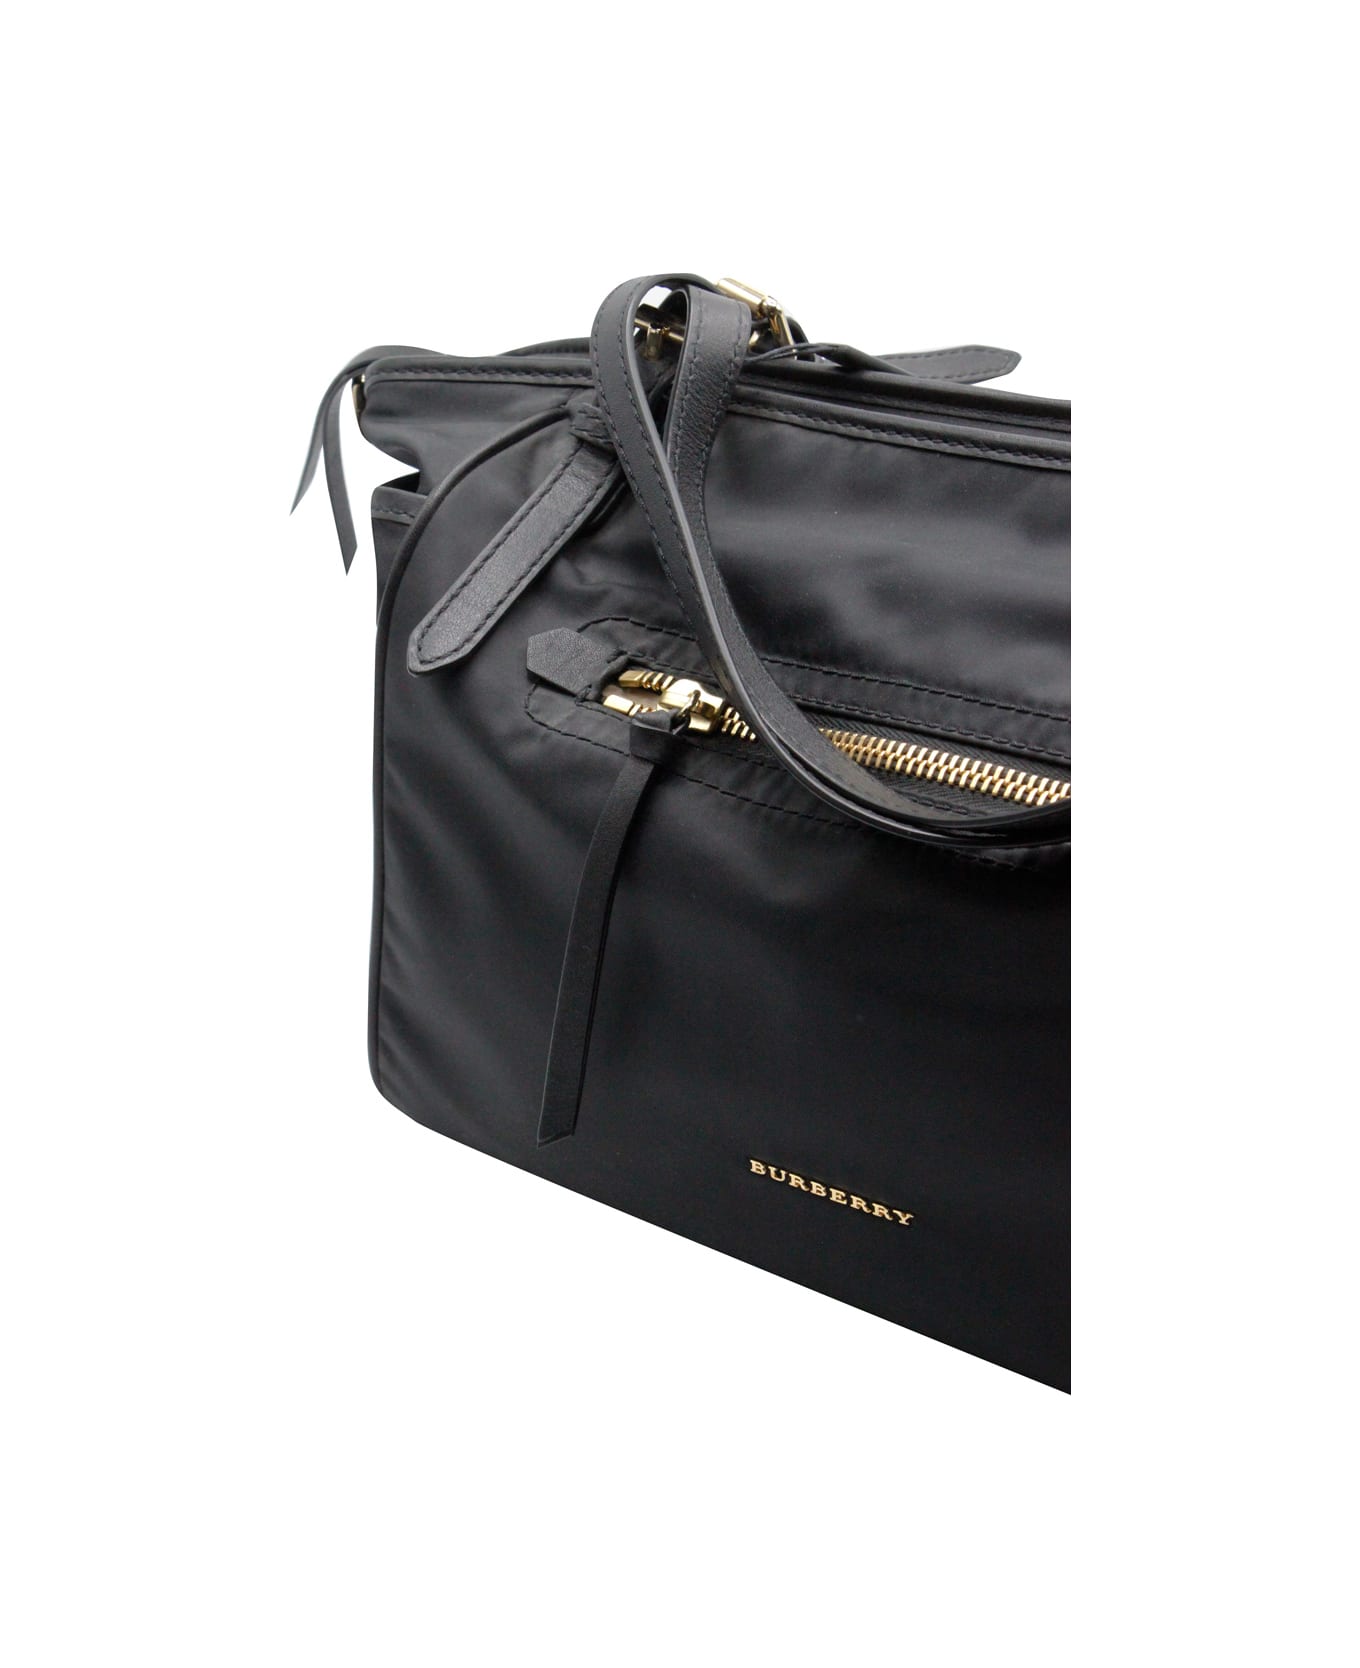 Burberry Mother's Changing Bag Made Of Technical Fabric With Leather Shoulder Strap, Comfortable Internal Pockets And Changing Mat. Measures Cm. 35x25x17 - Black アクセサリー＆ギフト